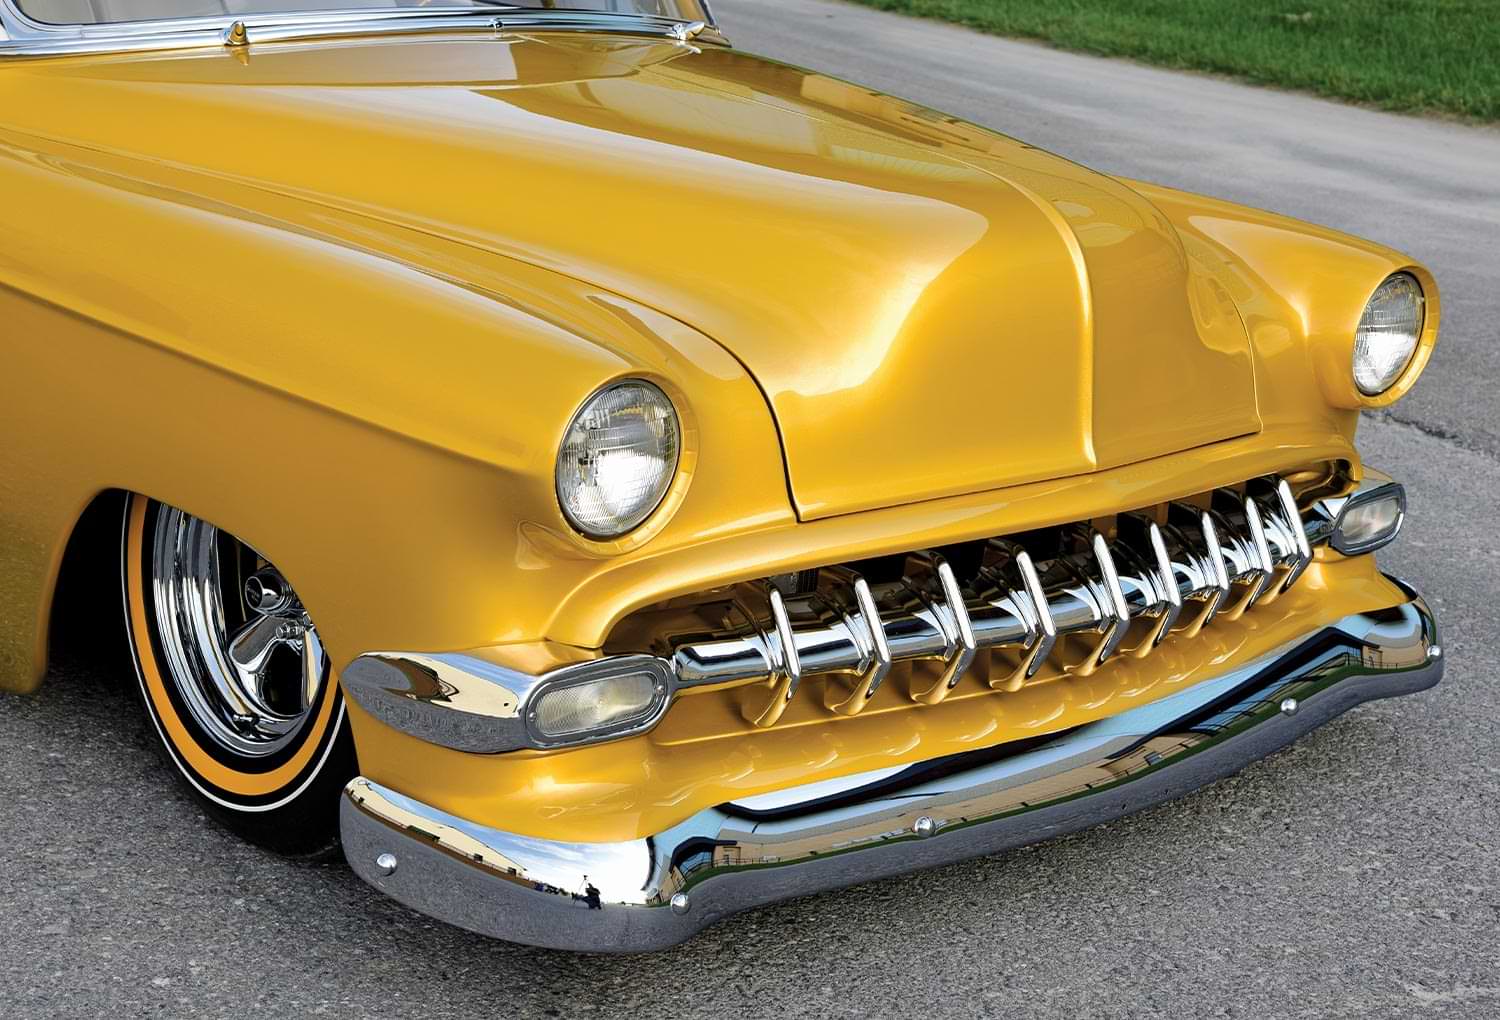 close view of the front section of the custom ’54 Chevy Bel Air including the tire, hood, headlights, grille and front bumper